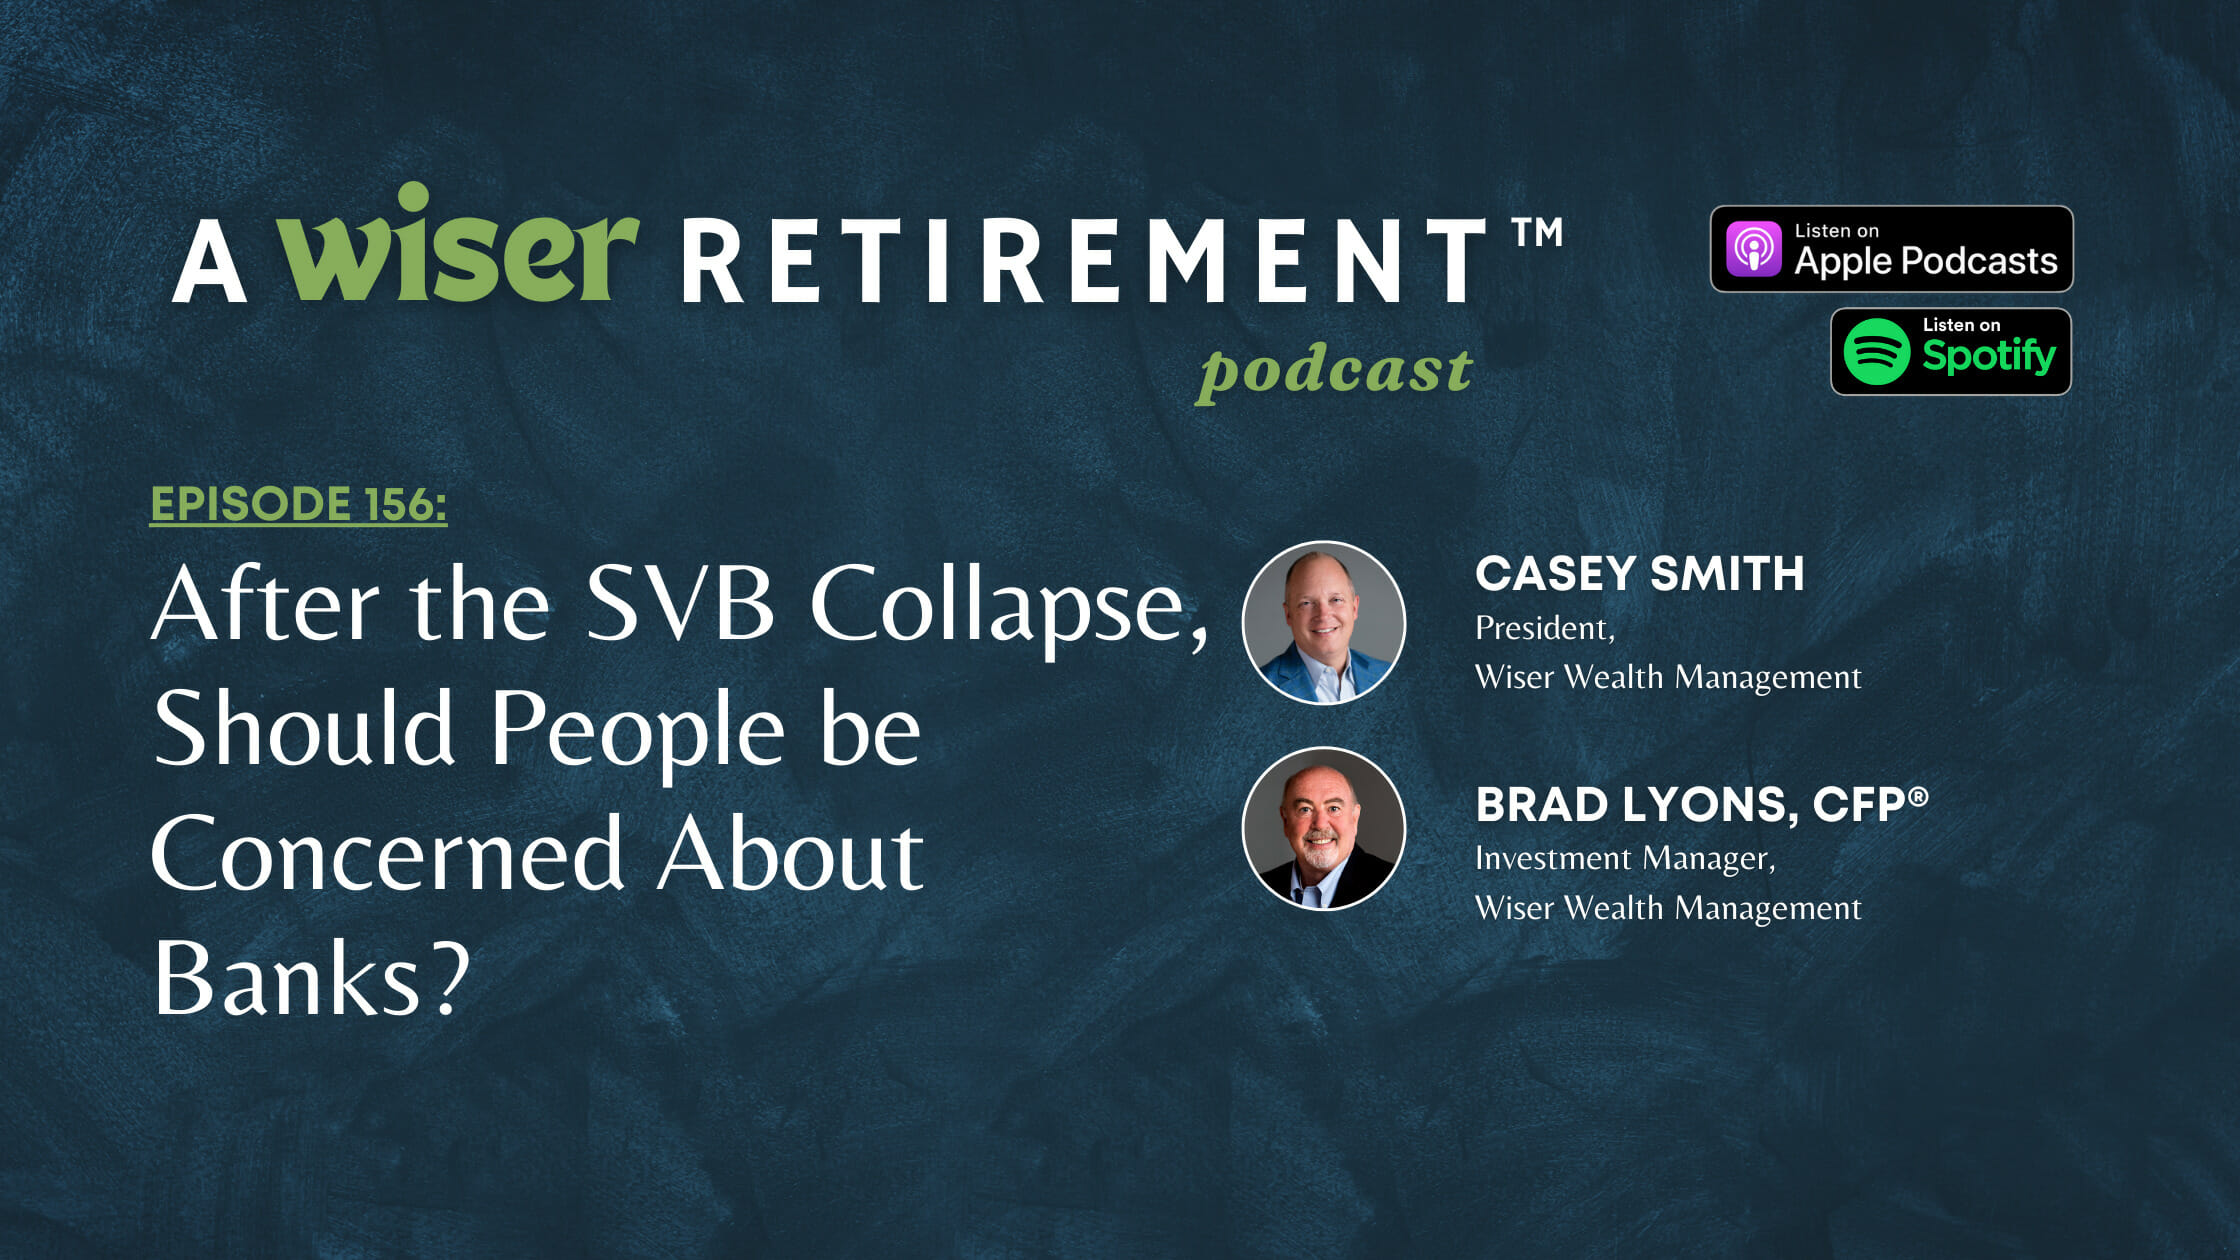 After the SVB Collapse, Should People be Concerned About Banks?